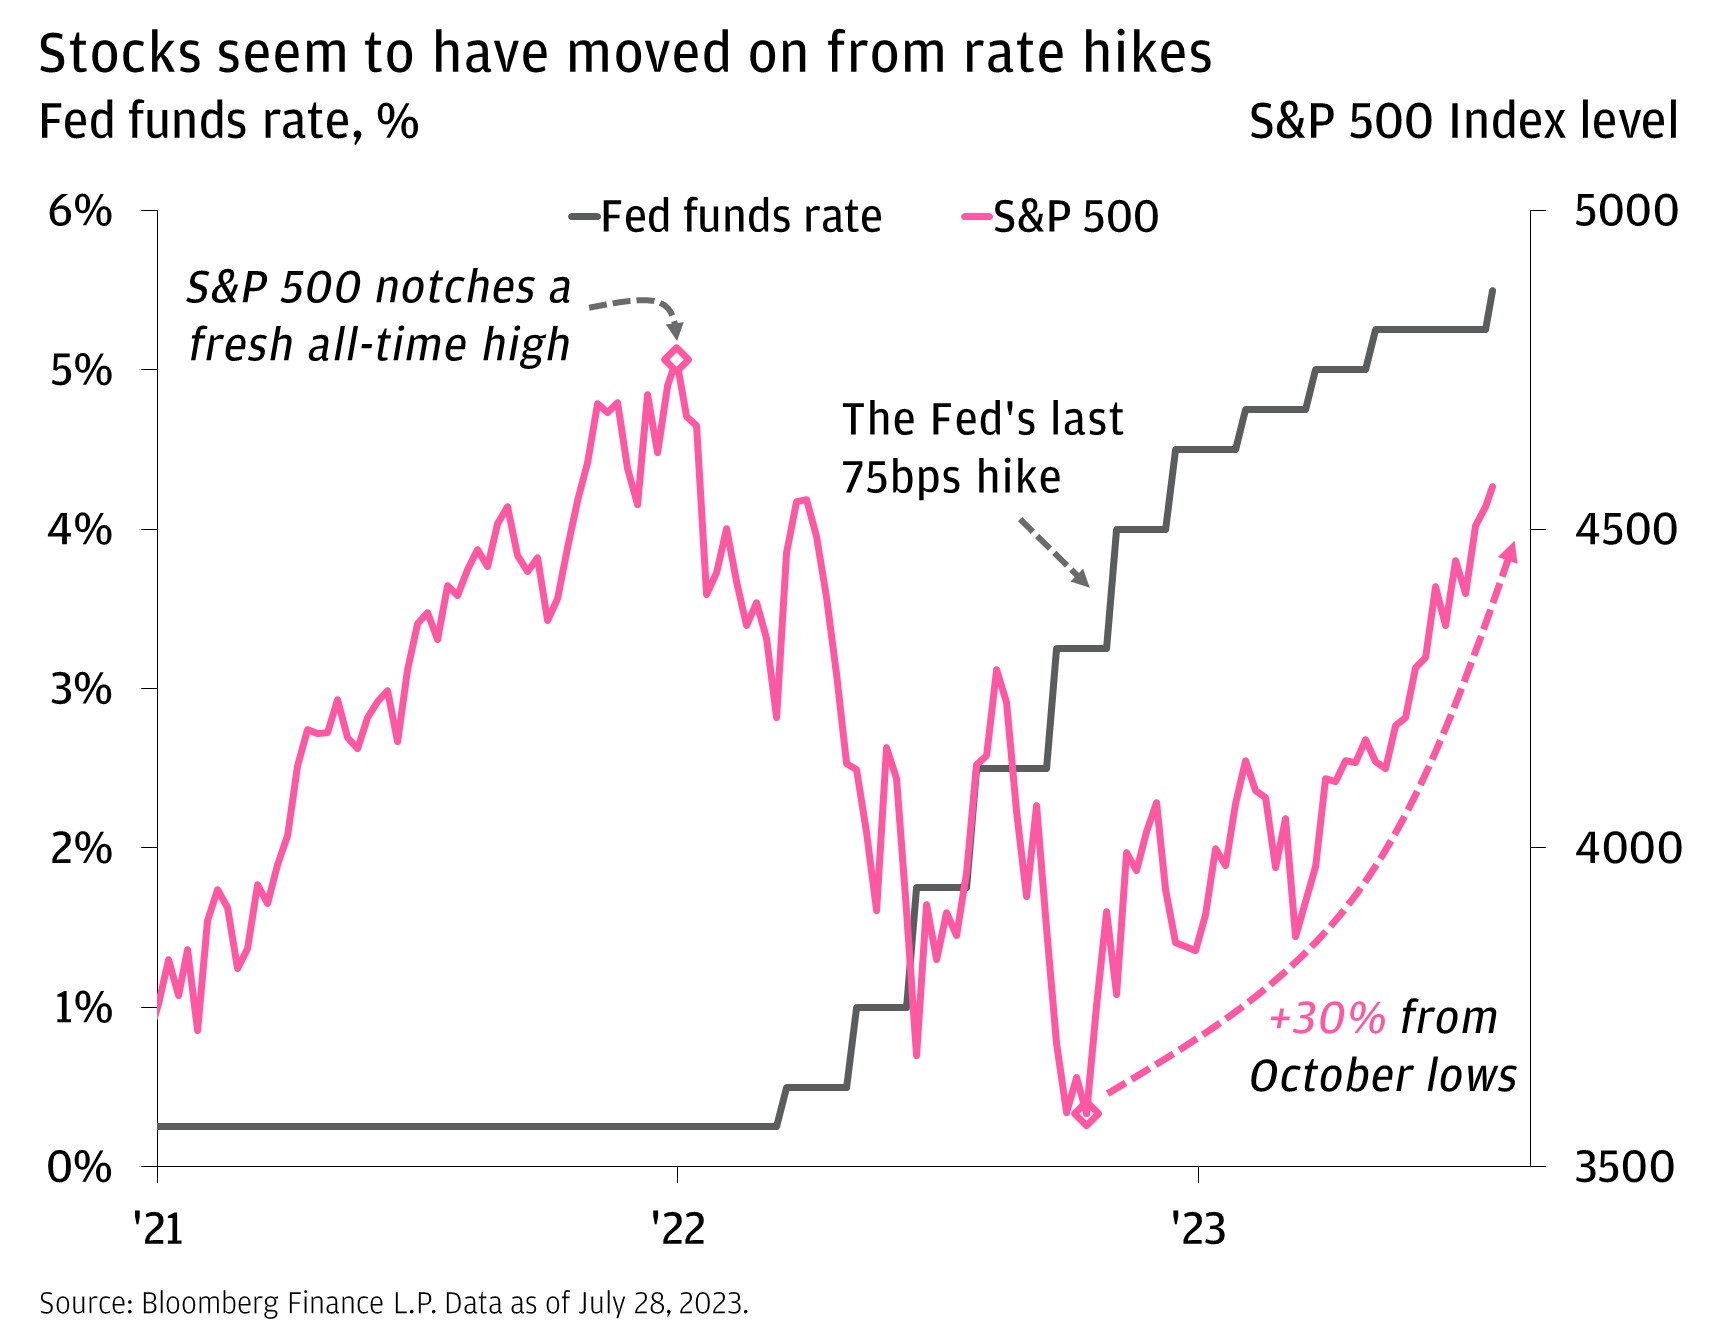 Stocks seem to have moved on from rate hikes